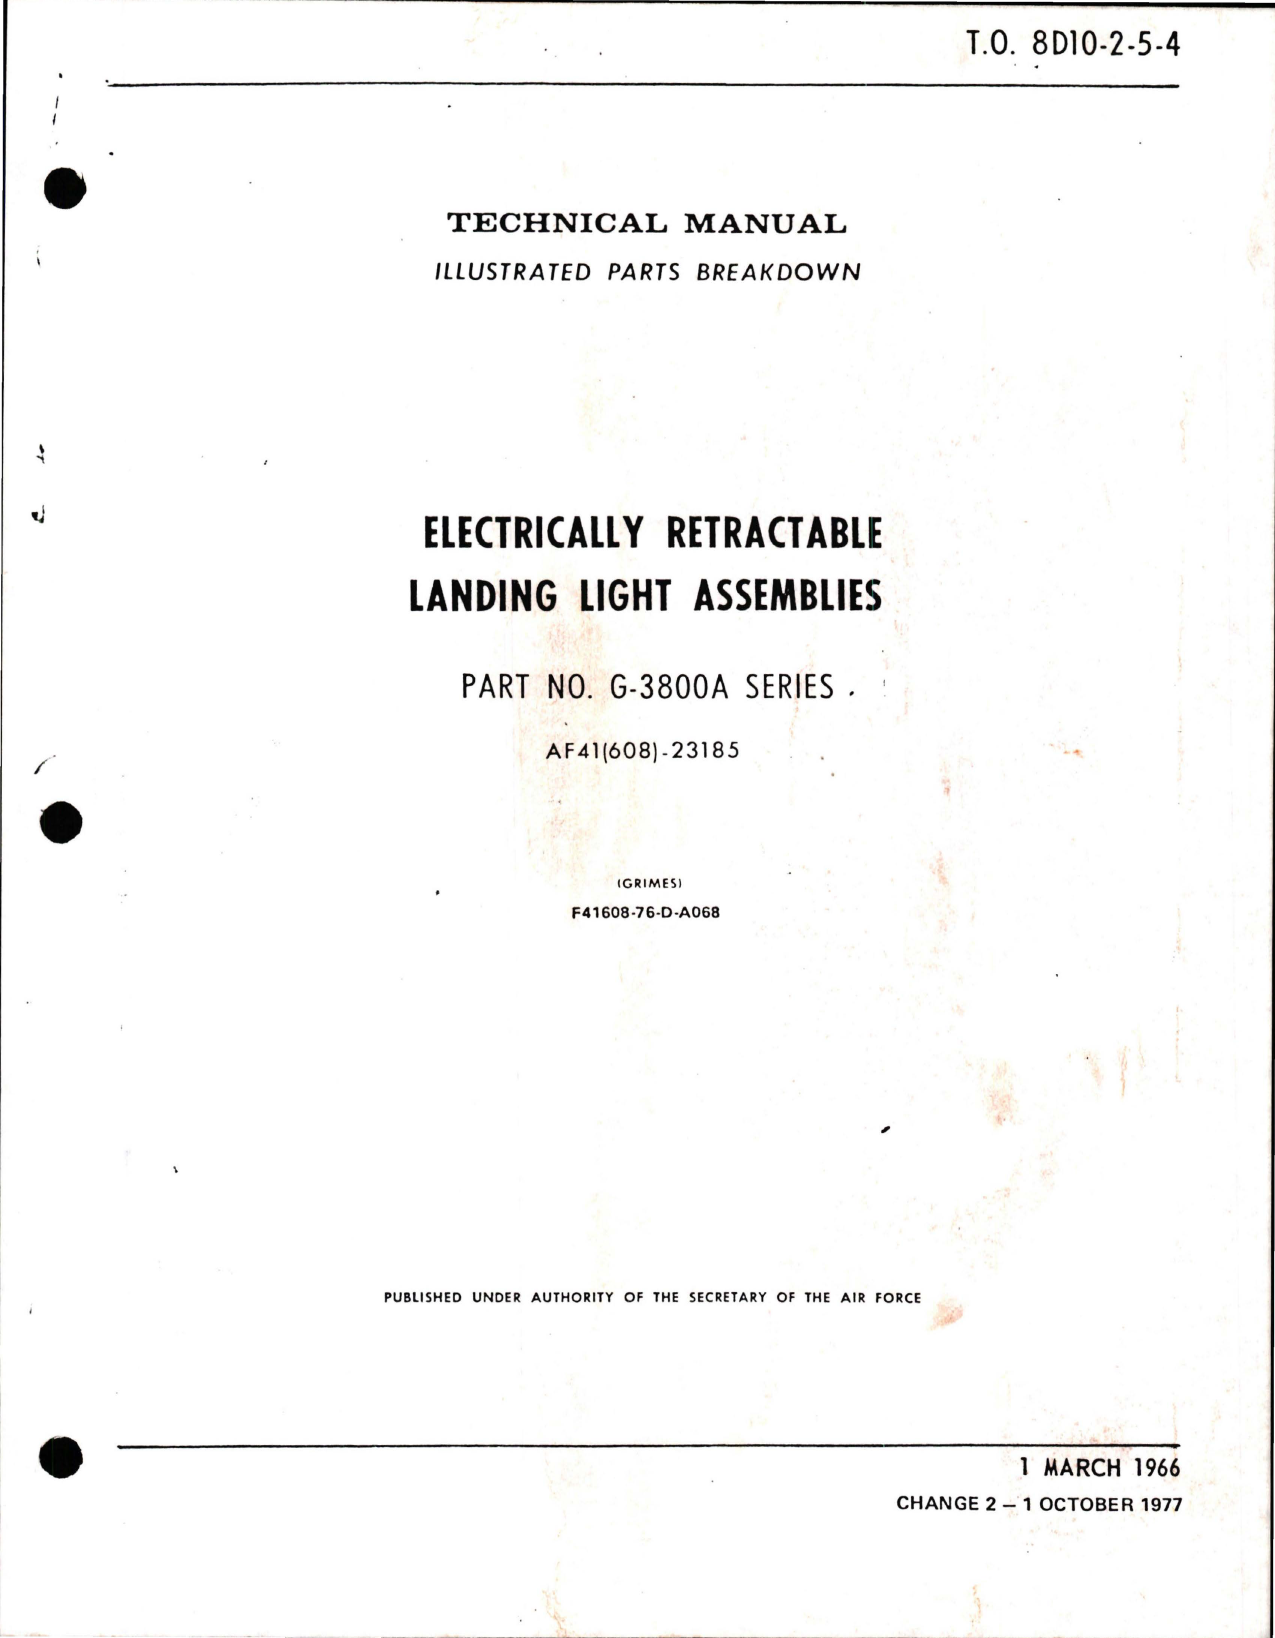 Sample page 1 from AirCorps Library document: Illustrated Parts Breakdown for Electrically Retractable Landing Light Assemblies - Part G-3800A Series - Change 2